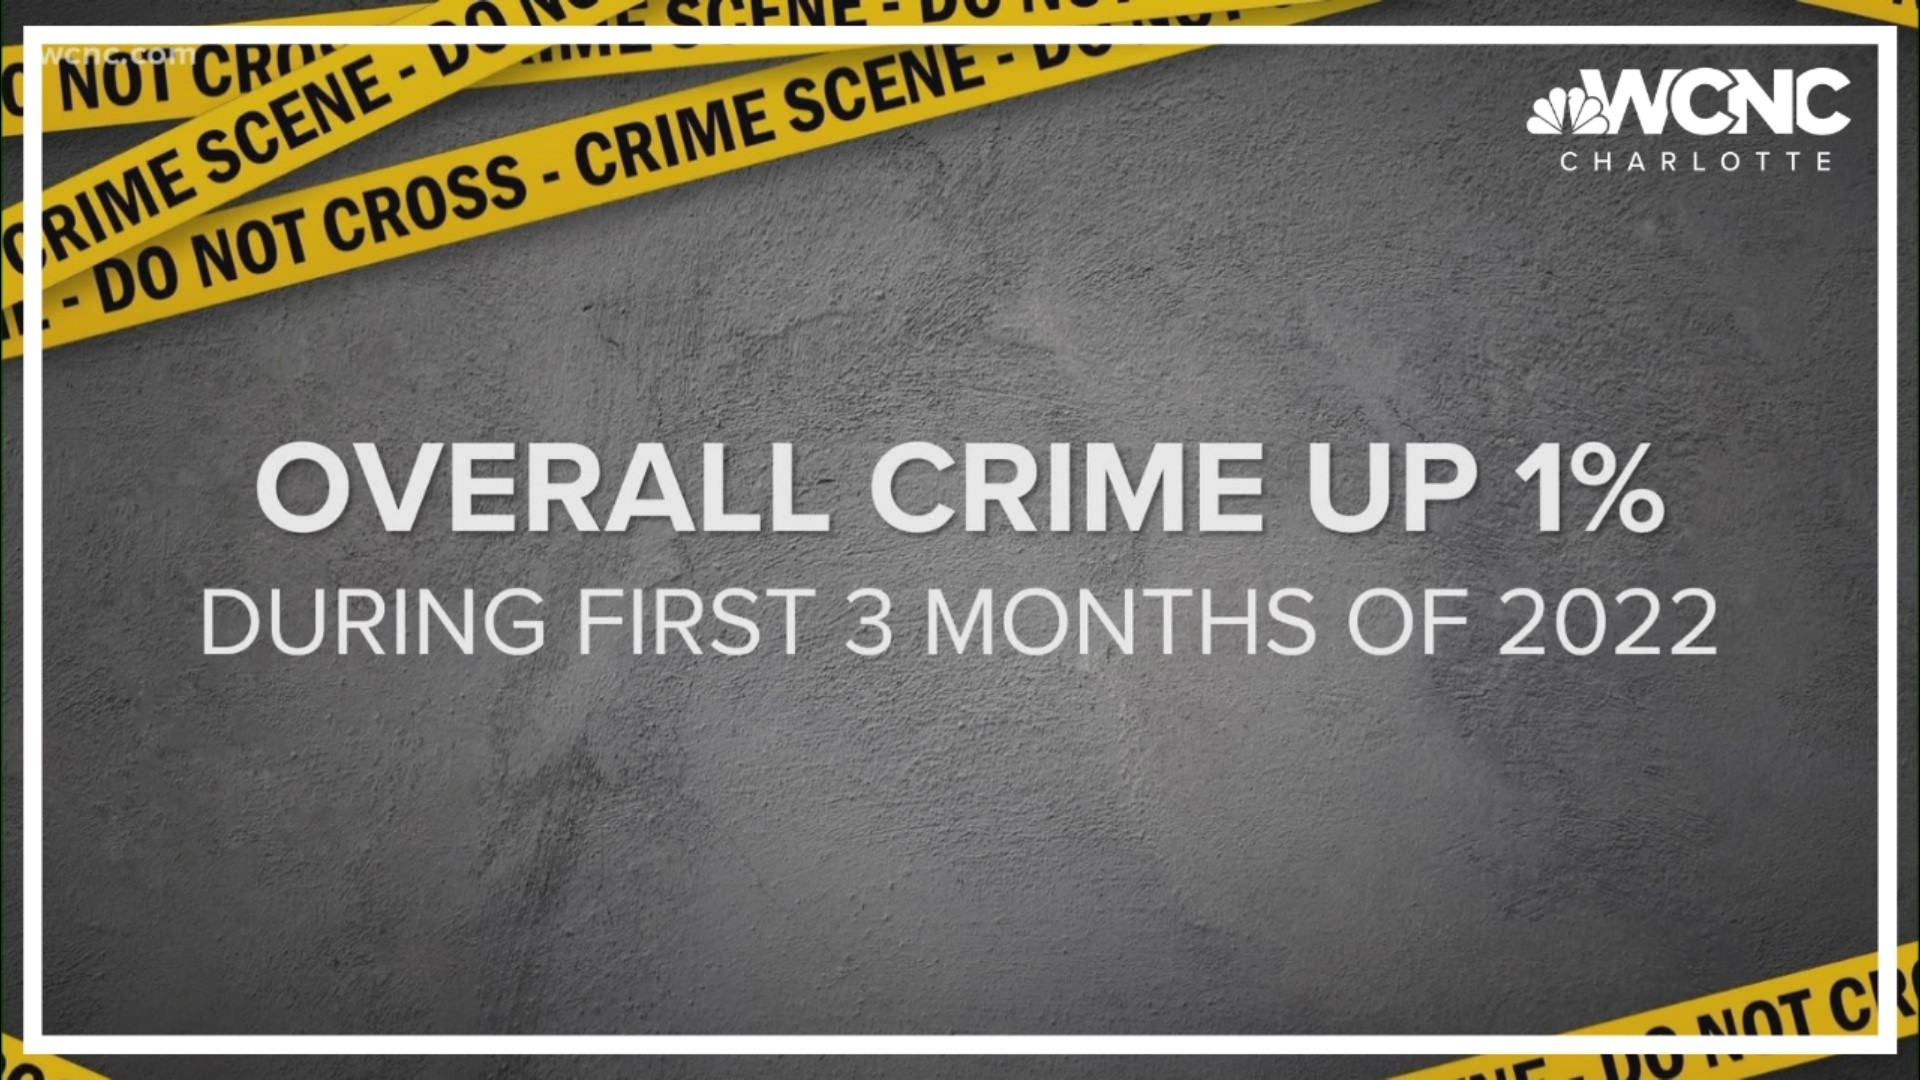 So far, overall crime is up 1% compared to the first quarter of 2021.